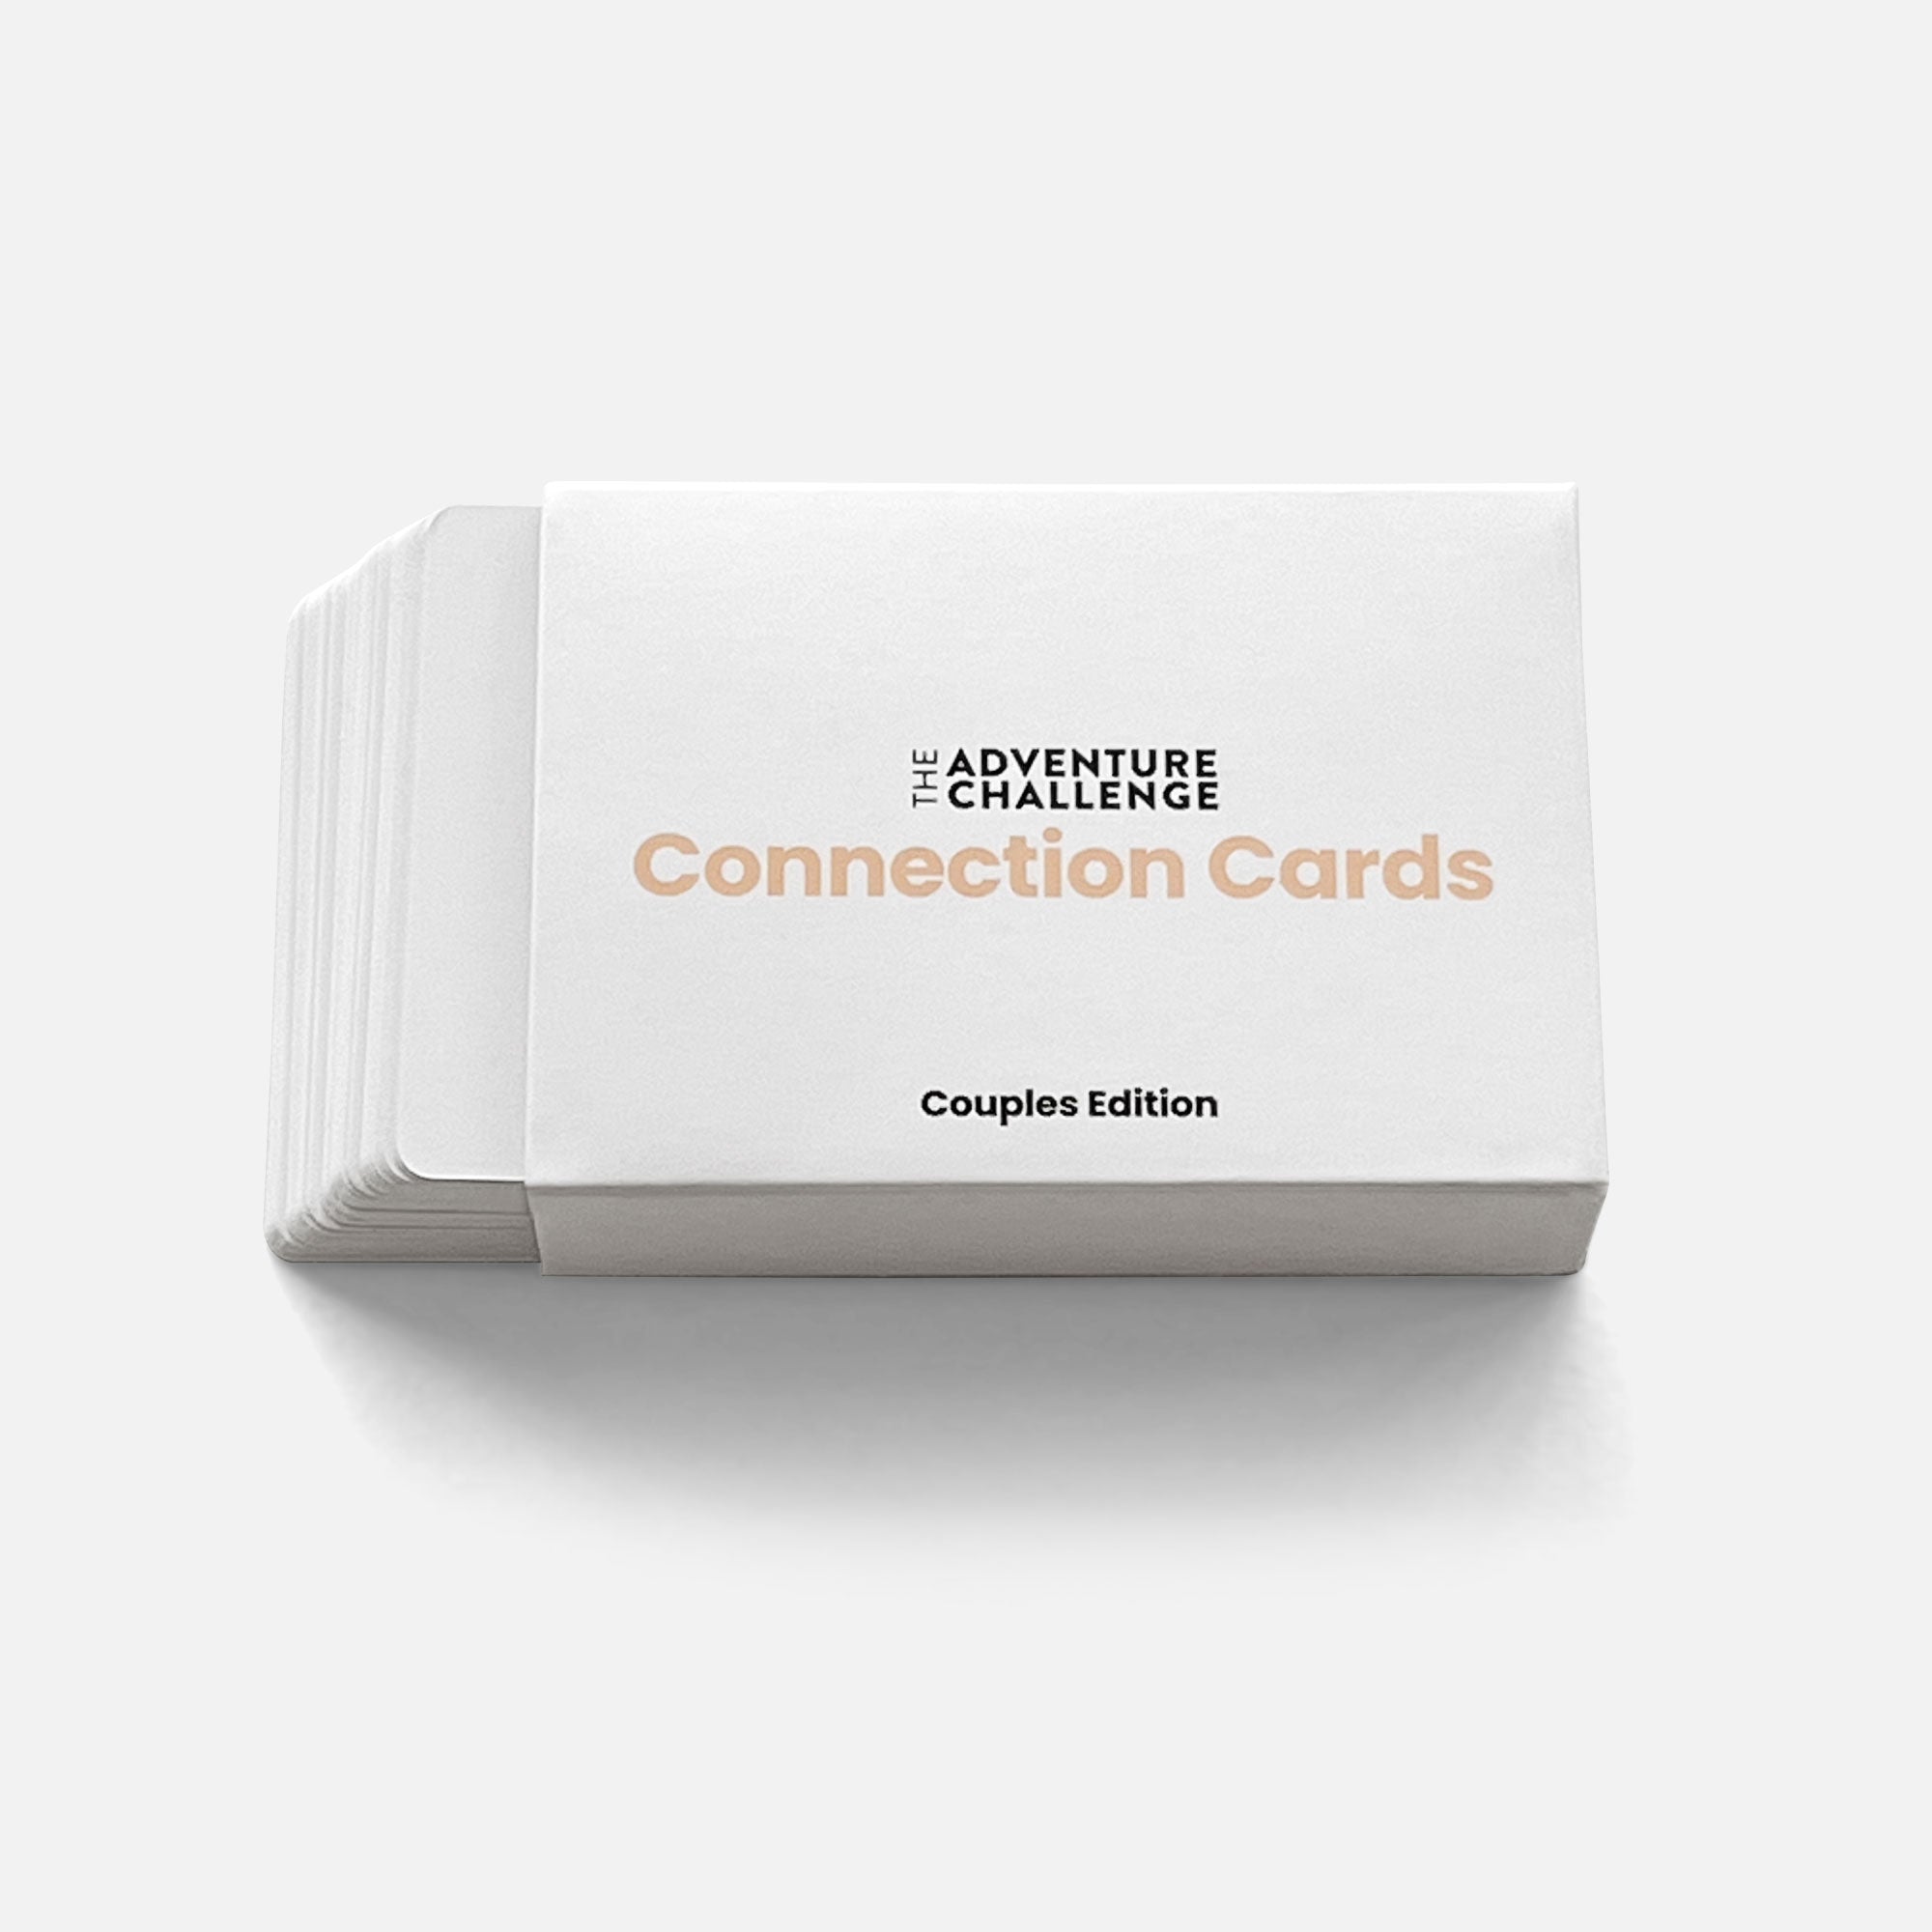 Upgrade your experience with Couples Connection Cards